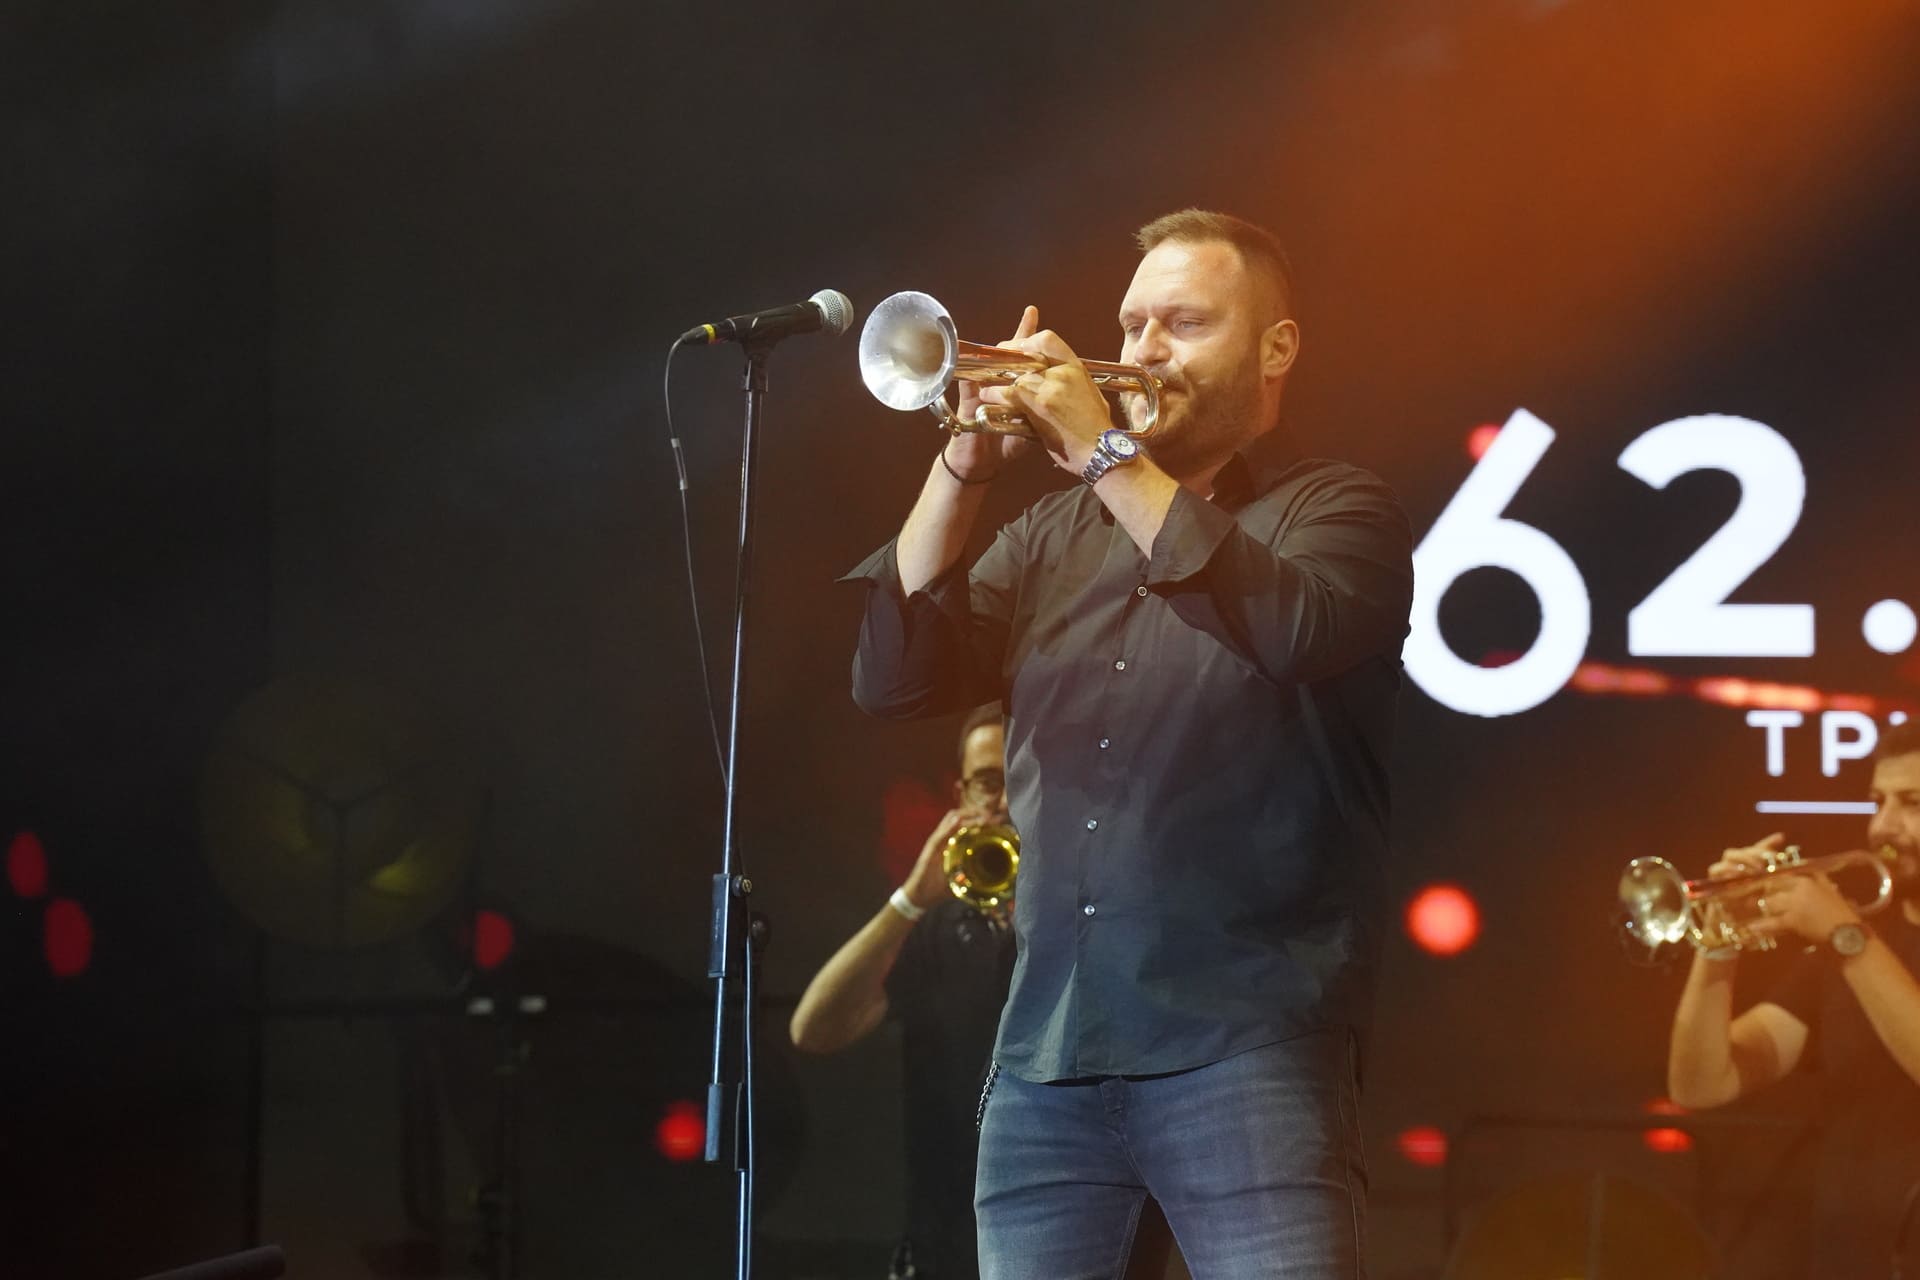 More than 120,000 guests on the first day of the first day of the Trumpeter Festival in Guca